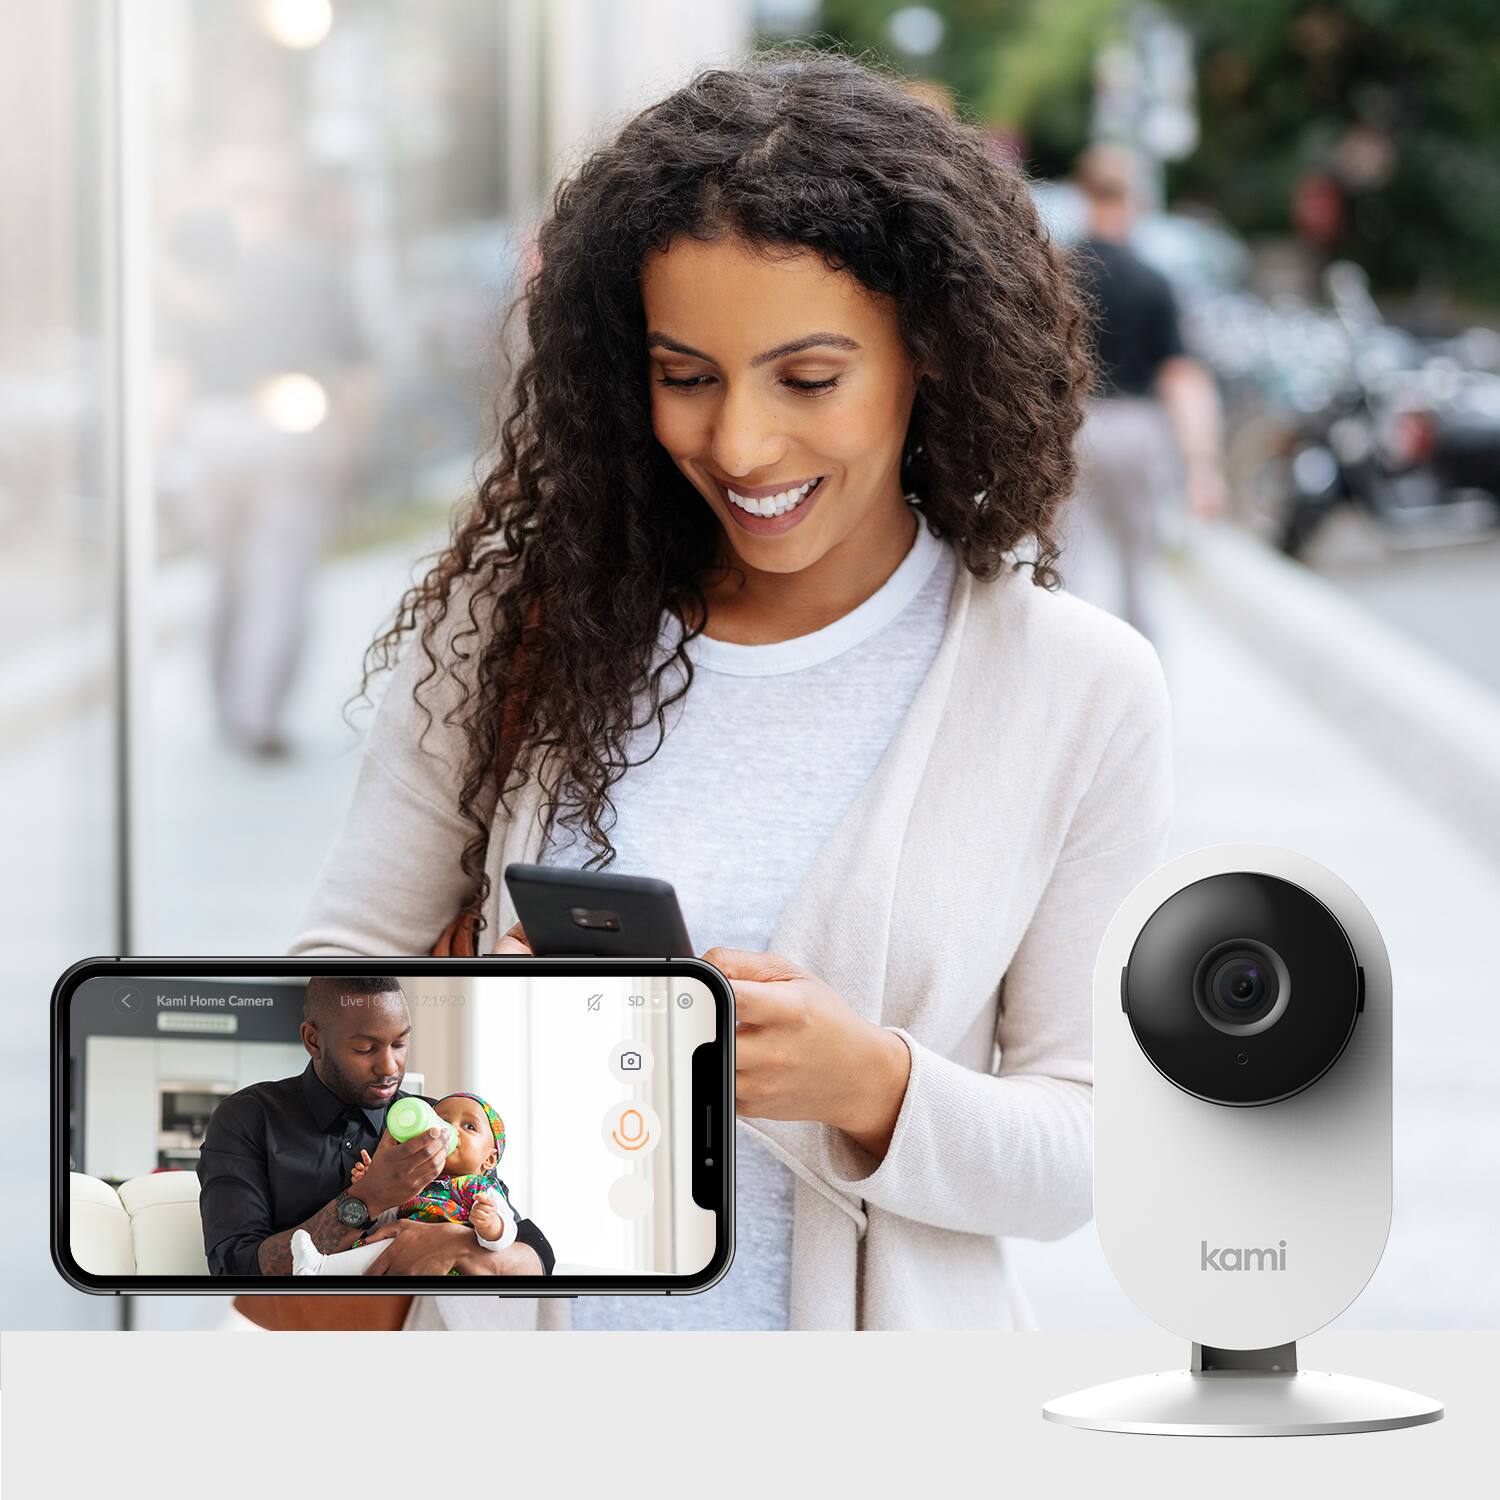 Kami 1080P Security Camera 4PCS, Wireless IP Home Surveillance System with Face Detection $82 + FS